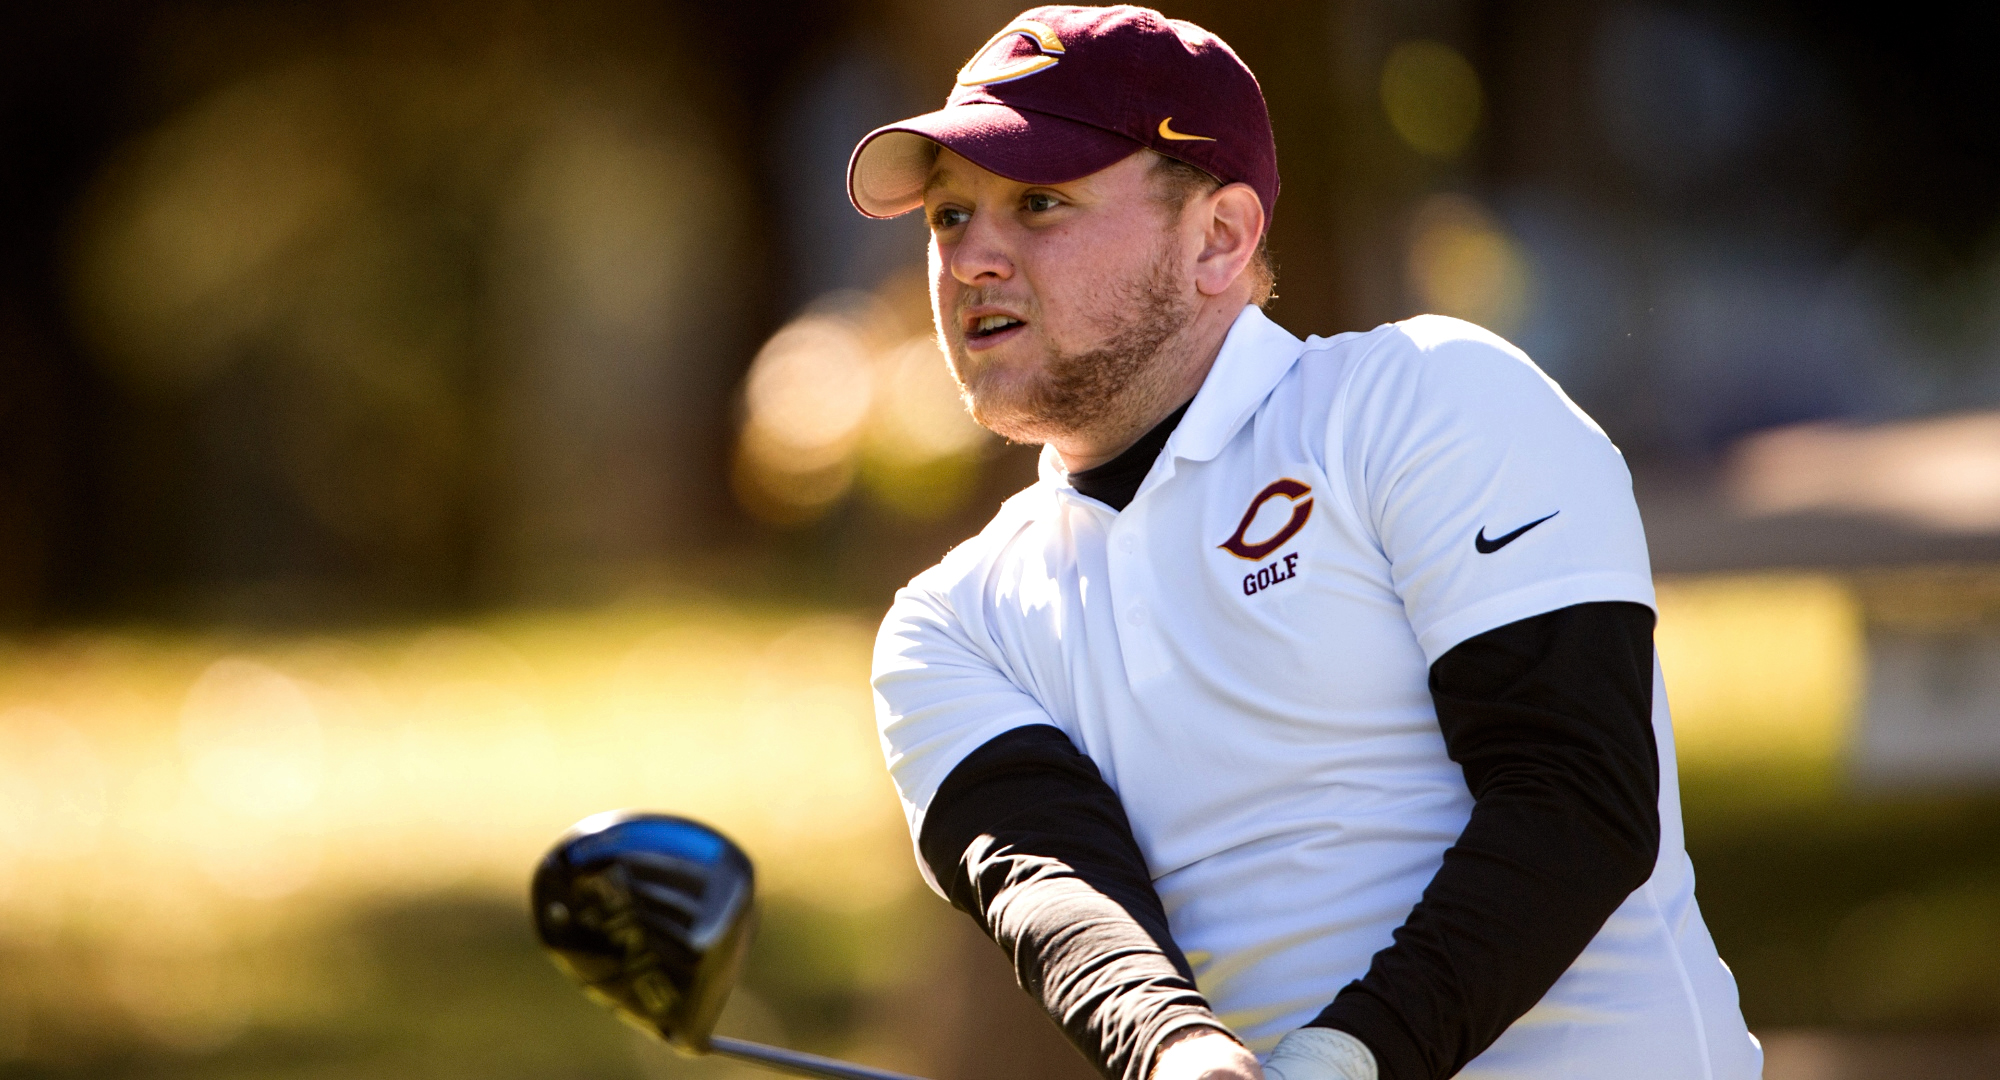 Sophomore Nathaniel Kahlbaugh shot the low round of the Cobber Spring Invite when he carded a 1-under 71 on Day 2 of the first tournament of the spring season.